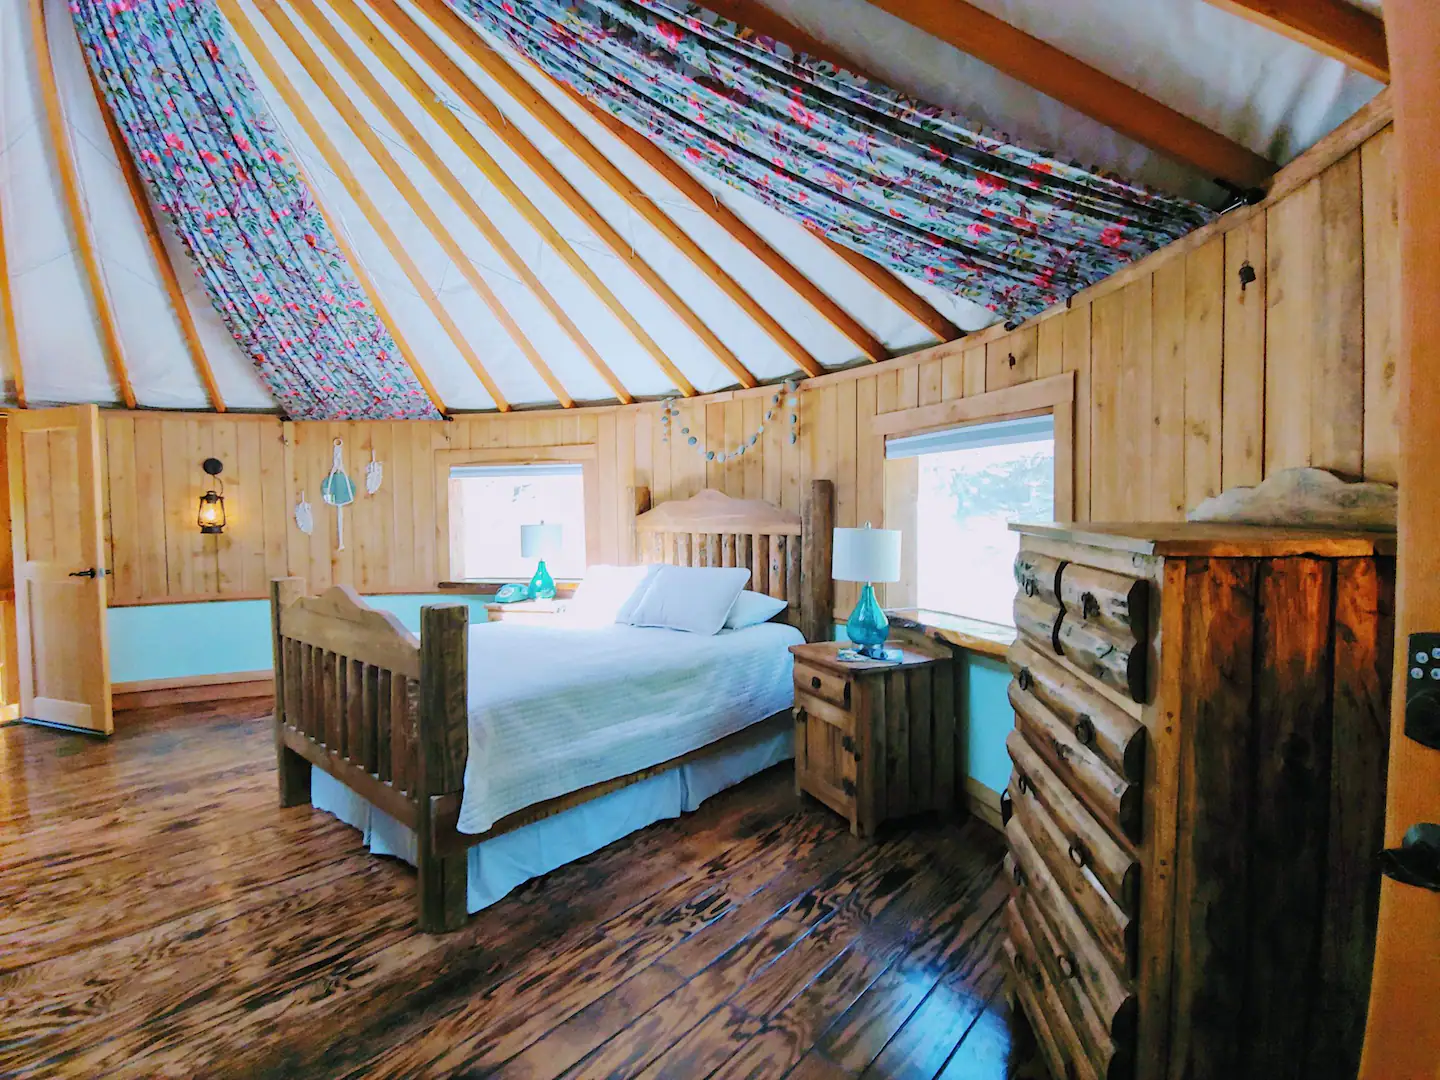 With a Queen bed and a full-size futon, this yurt comfortably sleeps four people.